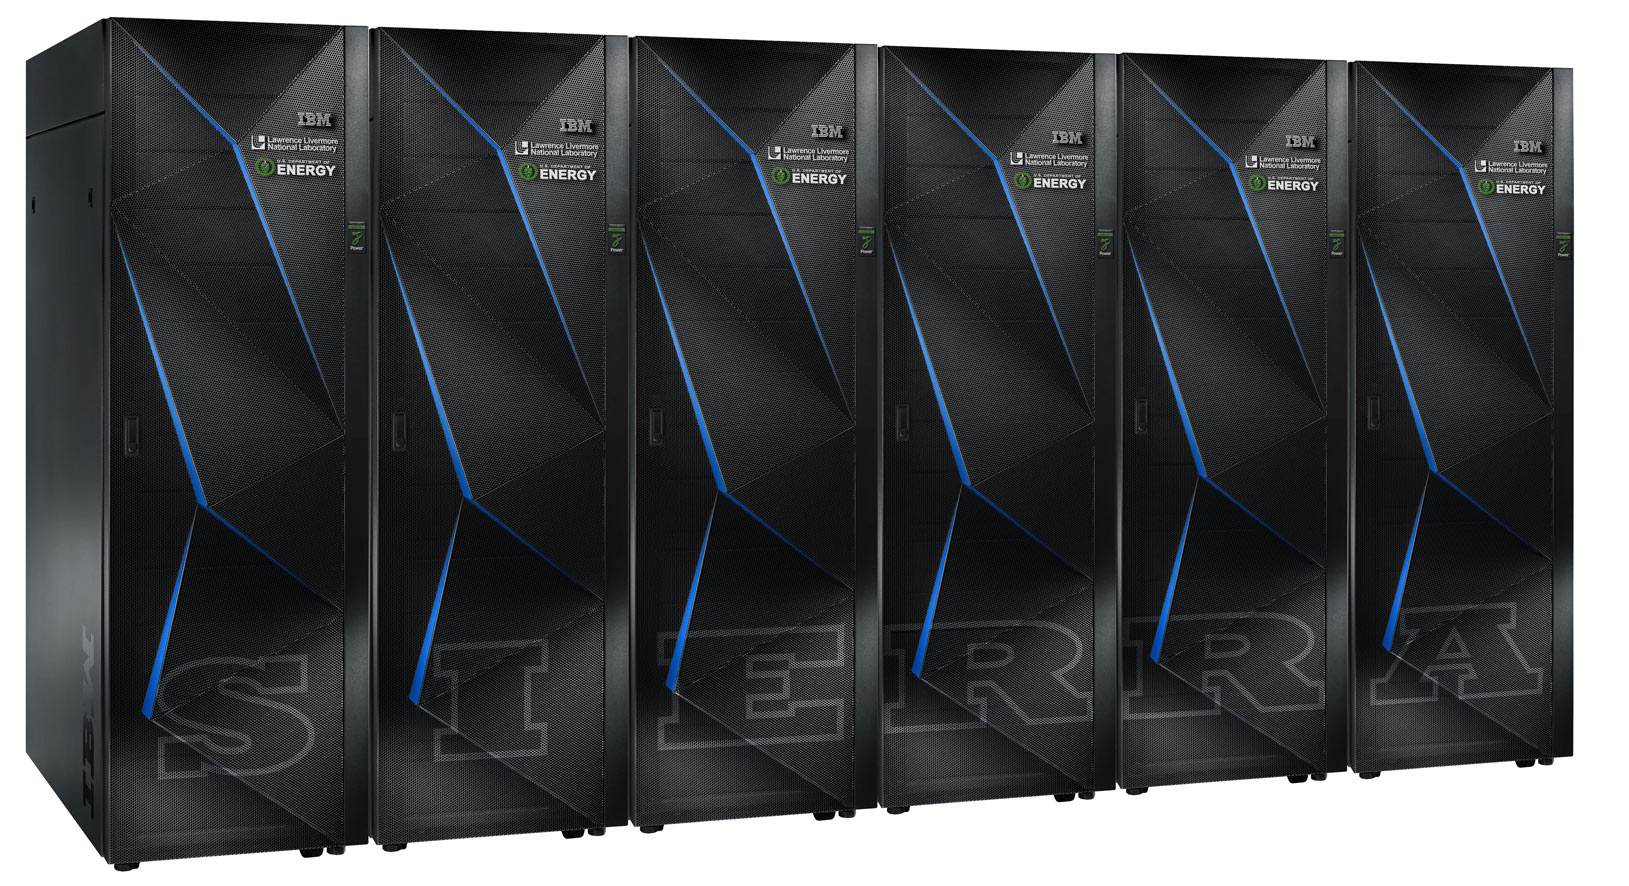 This rendering shows a few of the cabinets that ultimatly will comprise IBM's Sierra supercomputer at Lawrence Livermore National Laboratory.